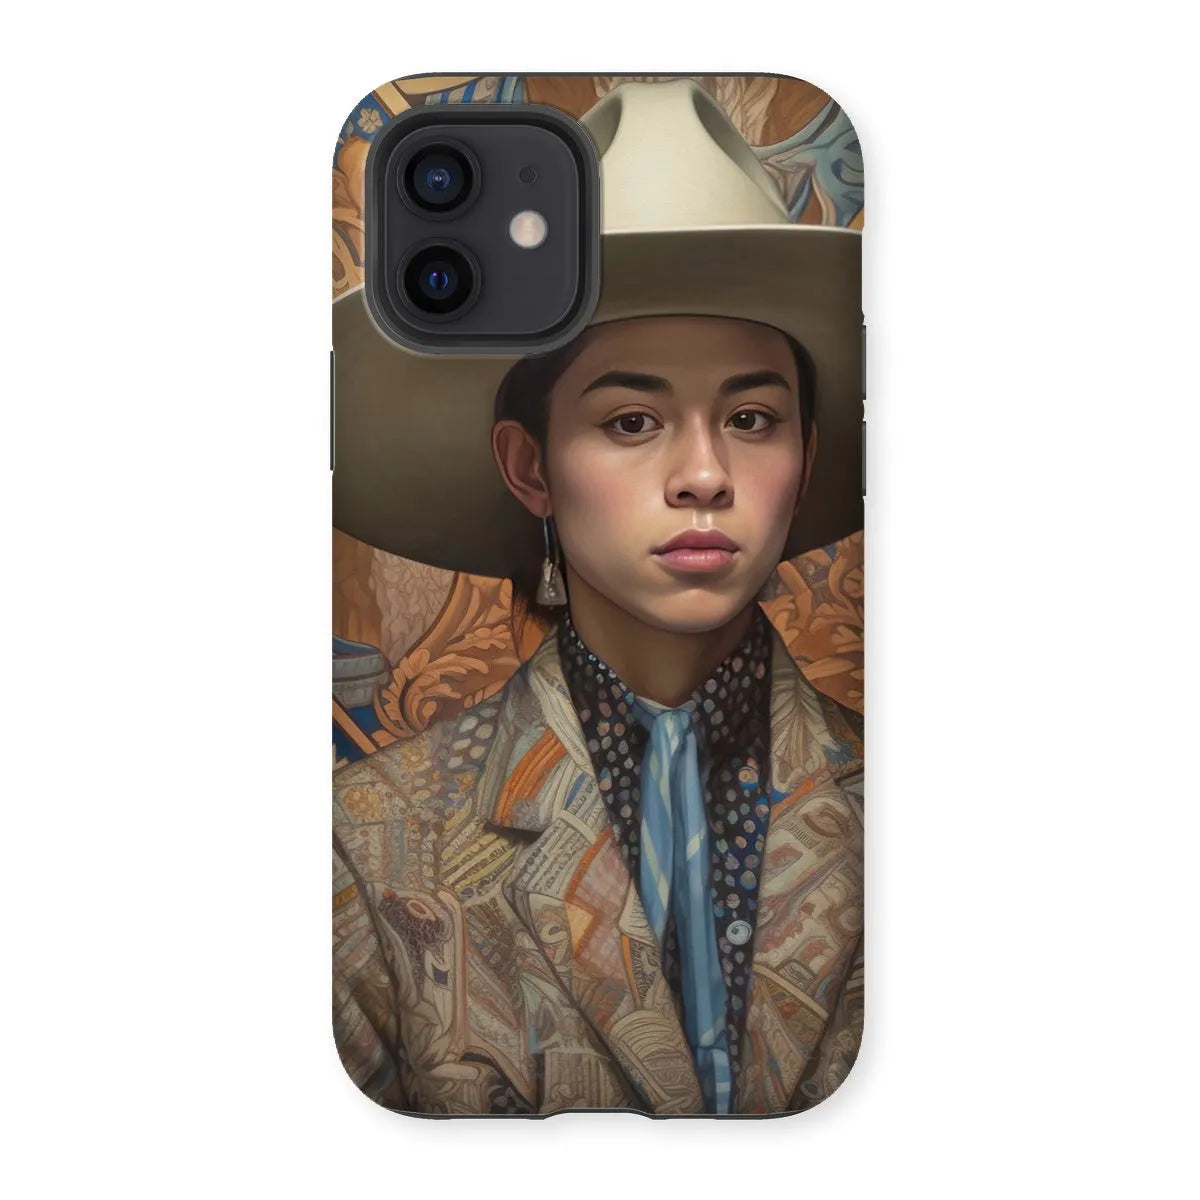 Angel The Transgender Cowboy - F2m Outlaw Art Phone Case - Iphone 12 / Matte - Mobile Phone Cases - Aesthetic Art